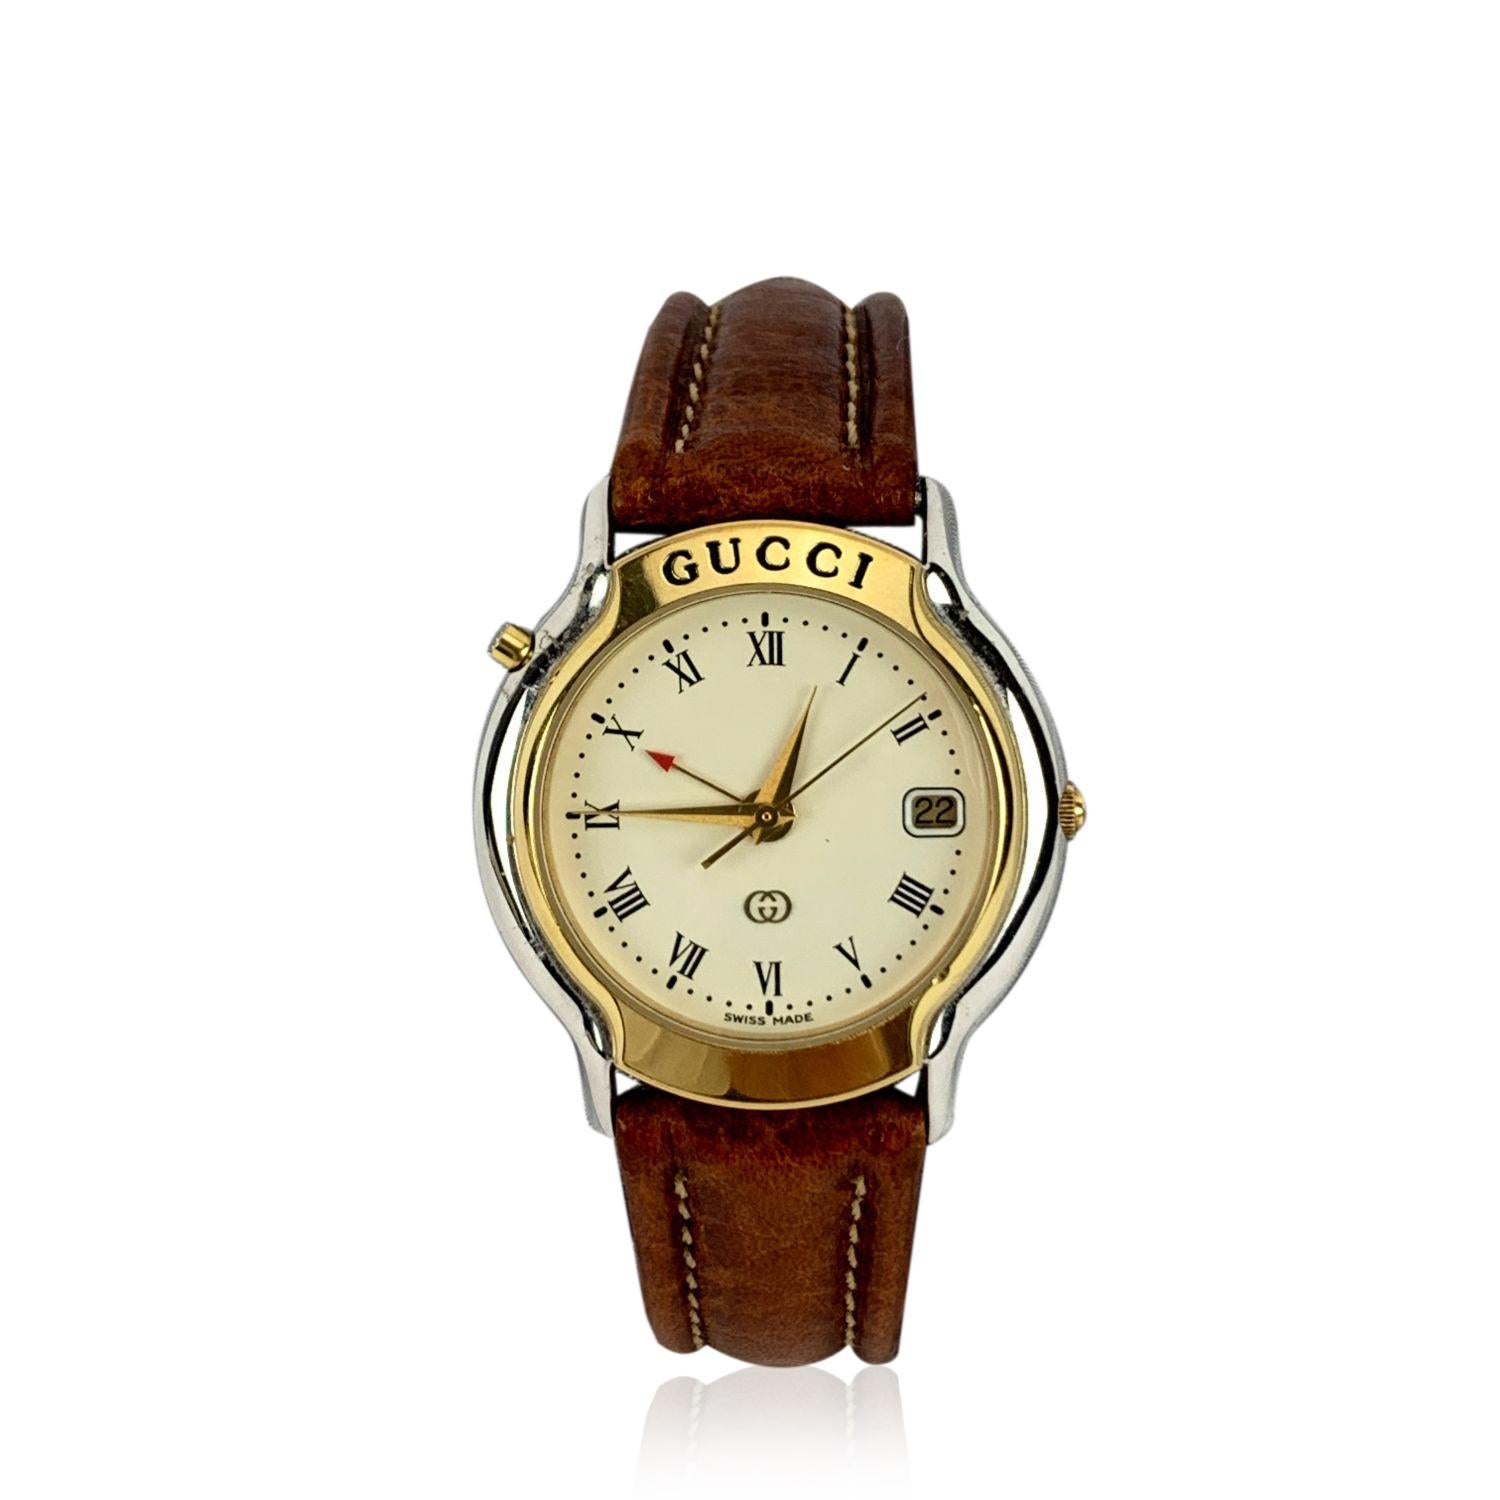 Beautiful vintage wristwatch by GUCCI, mod. 8200 M. Round gold metal and silver tone stainless steel case.Gucci signature on the bezel. White dial. Date indicator at 3 'o clock. Swiss Made Quartz Movement. Brown leather wrist strap with 6 holes